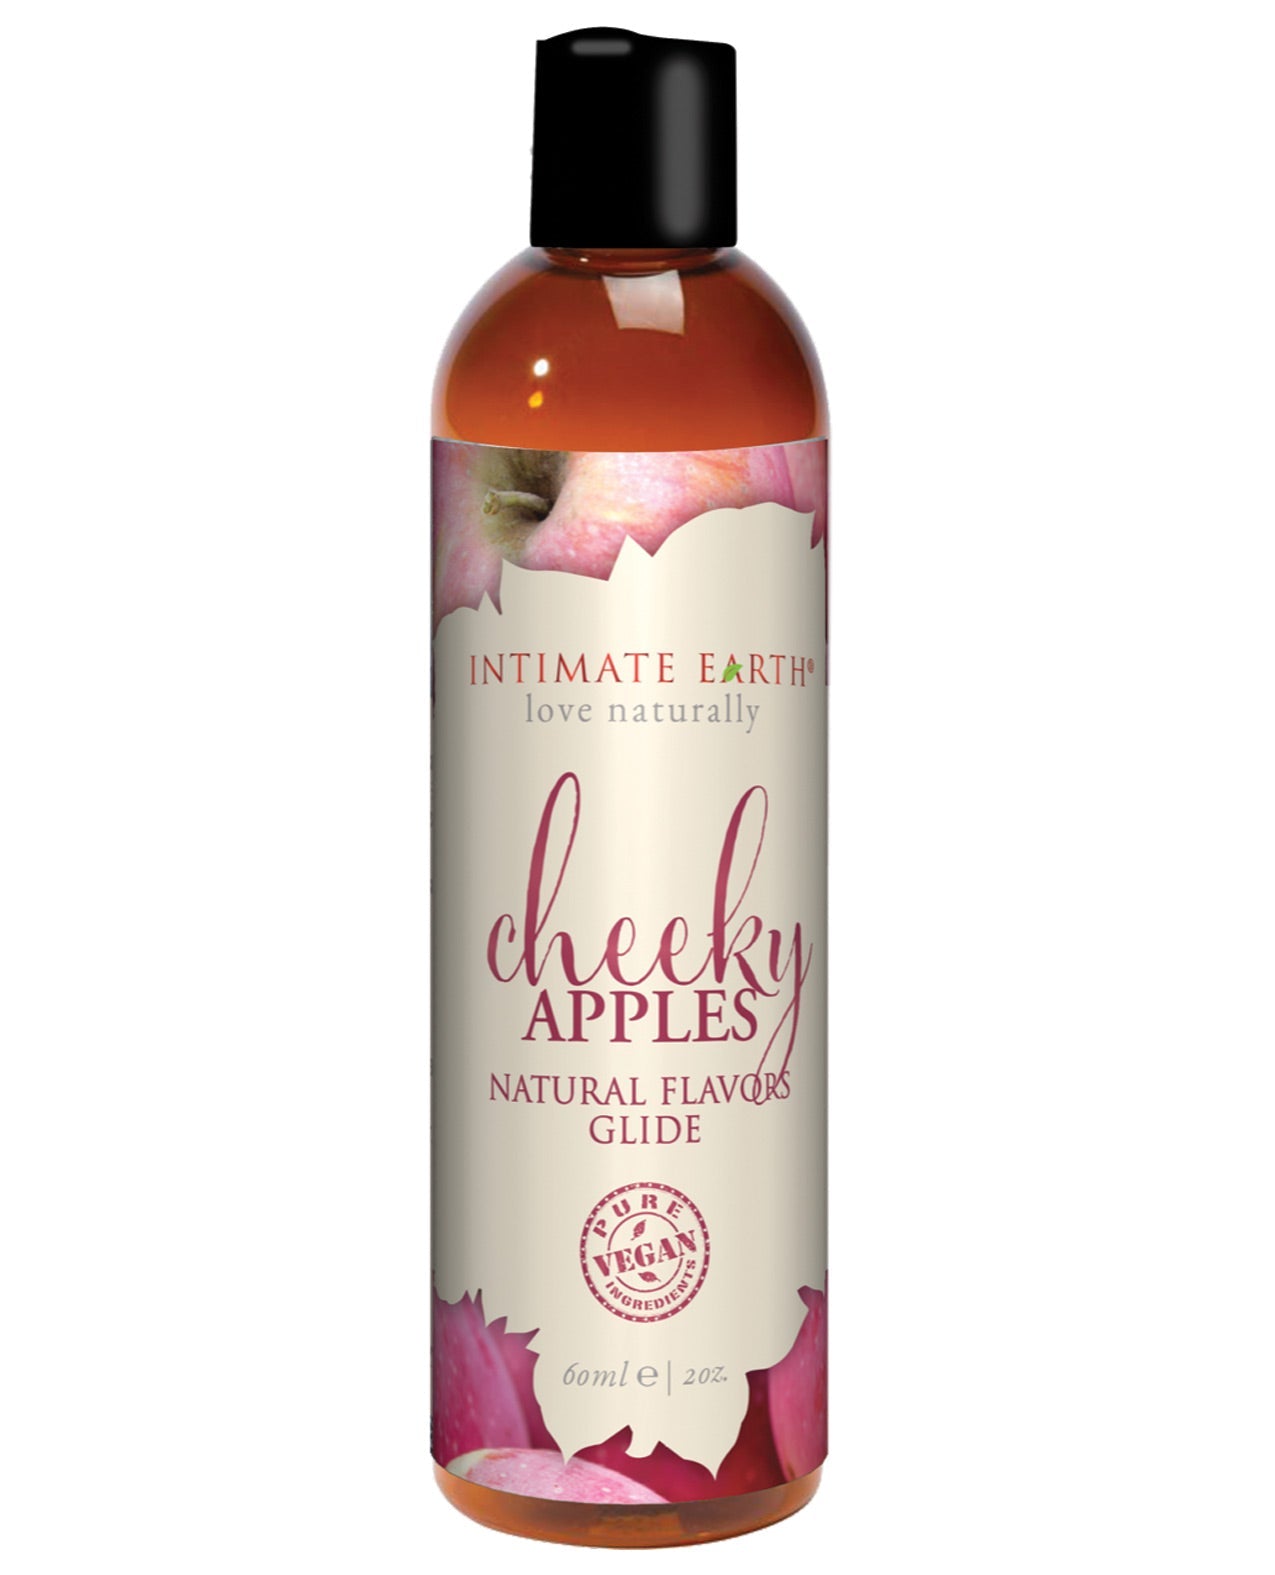 Intimate Earth Natural Flavors Glide – 60 ml Cheeky Apples